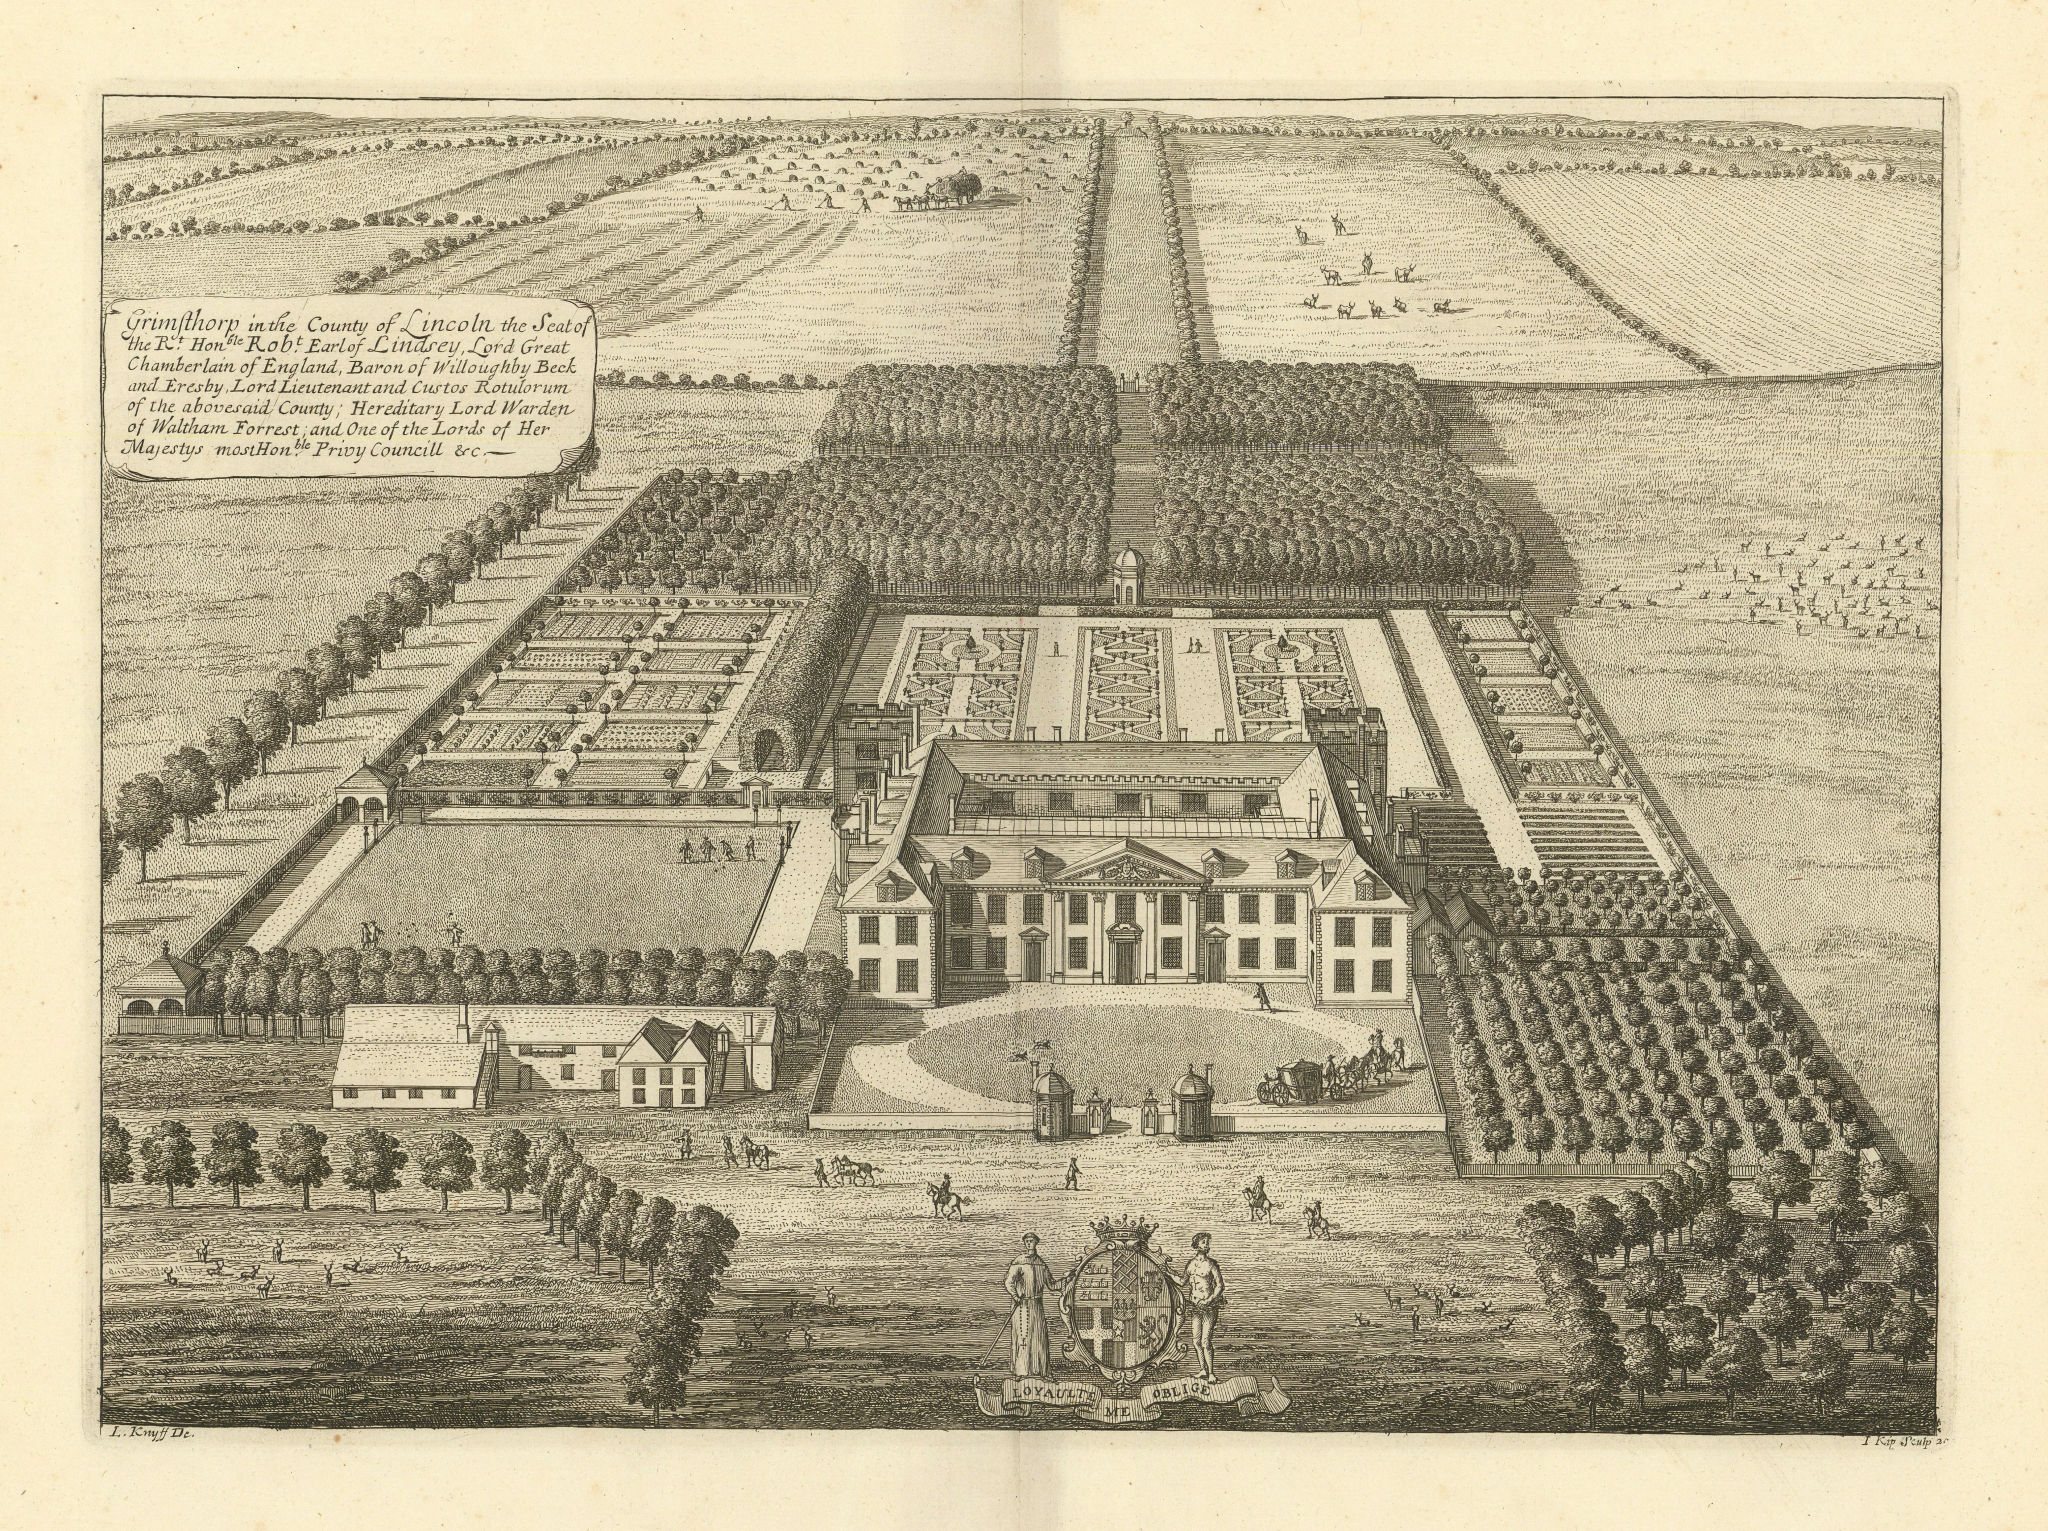 Associate Product Grimsthorpe Castle by Kip/Knyff Pl.20 "Grimsthorp in the County of Lincoln" 1709